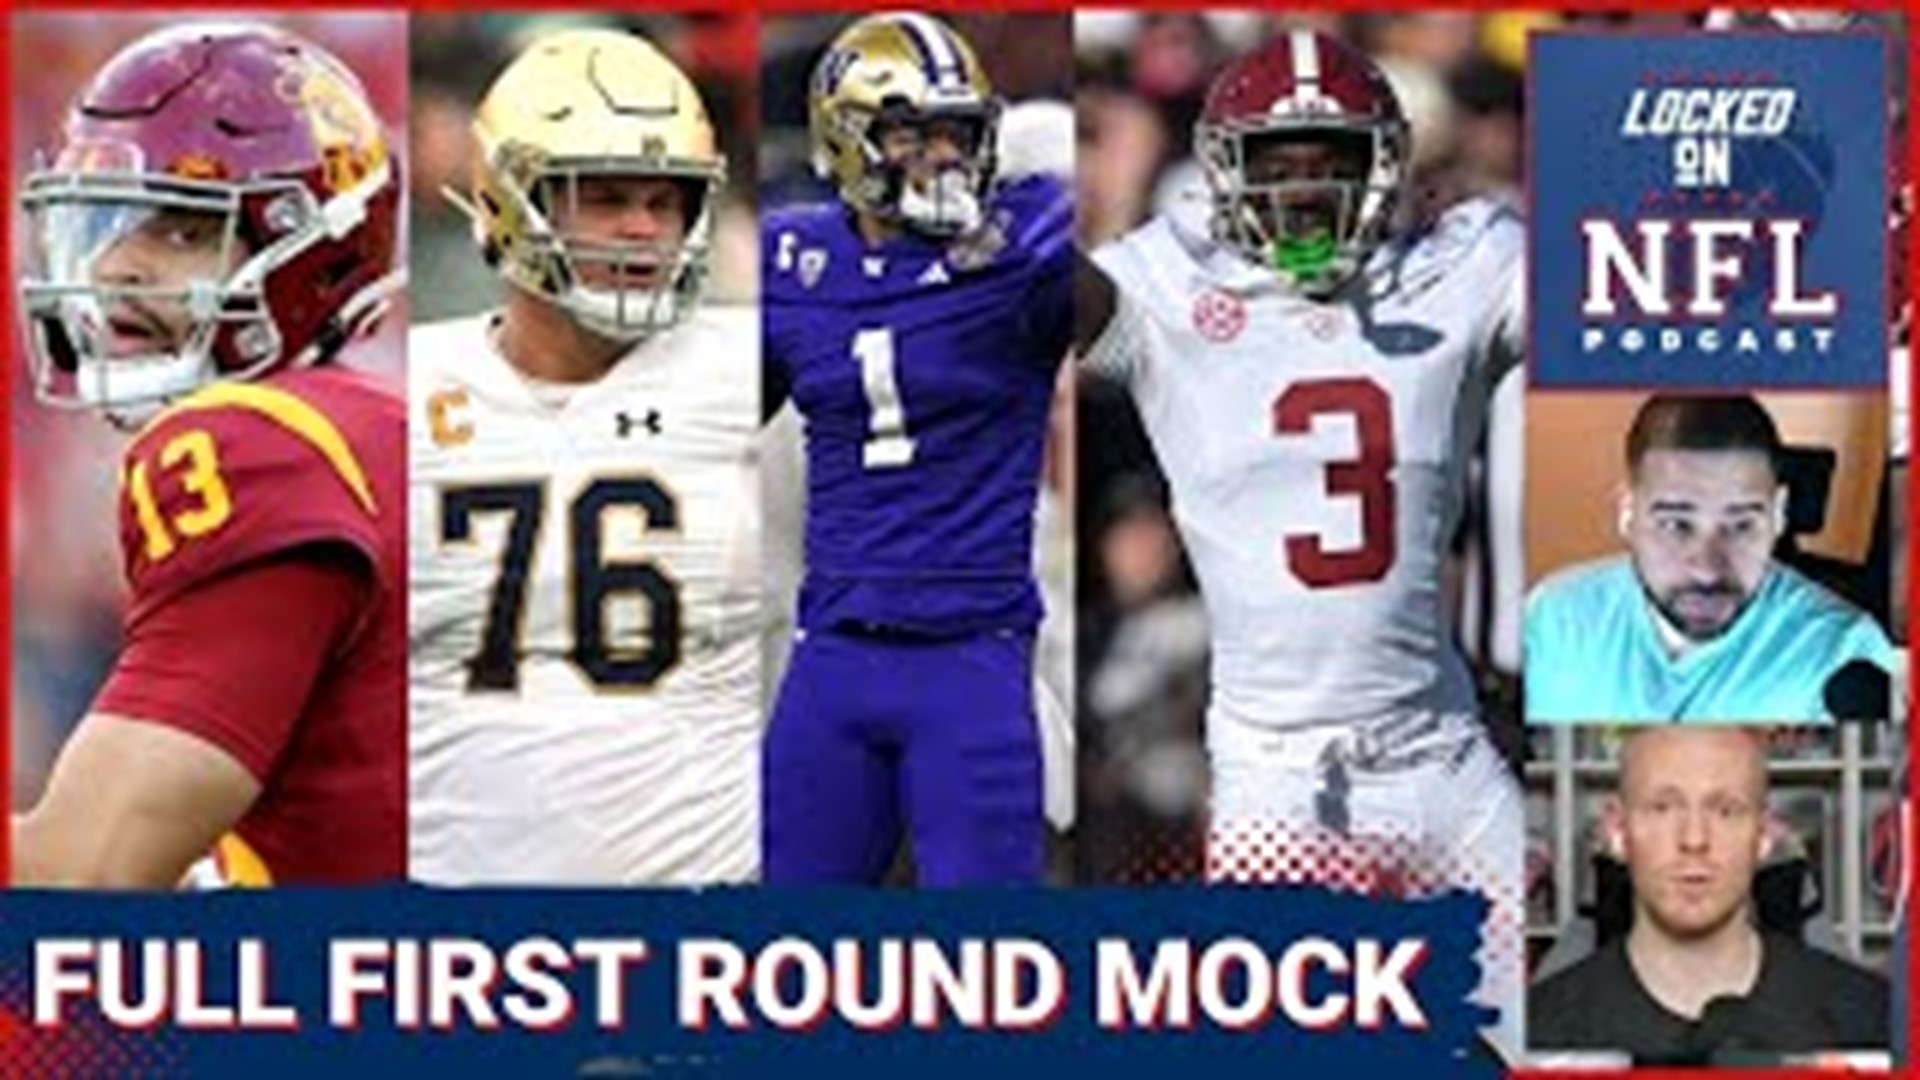 Chris Carter and James Rapien do a full first round mock draft of every pick, and alternate with who each team takes. Who do they have your team taking in the first?